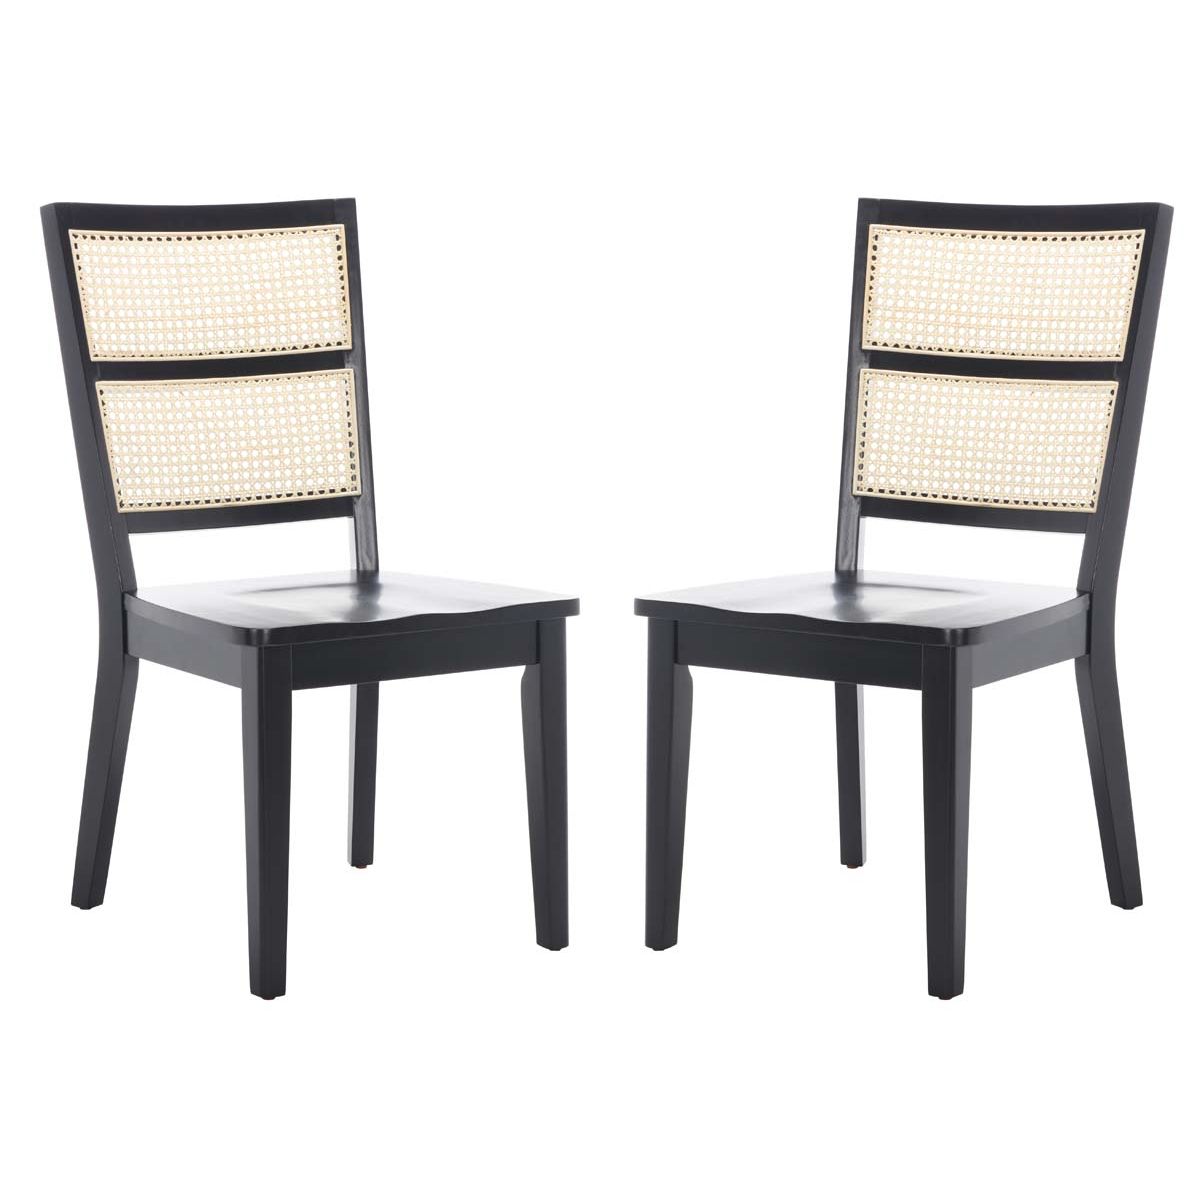 Safavieh Toril Dining Chair (Set of 2) , DCH1013 - Black / Natural